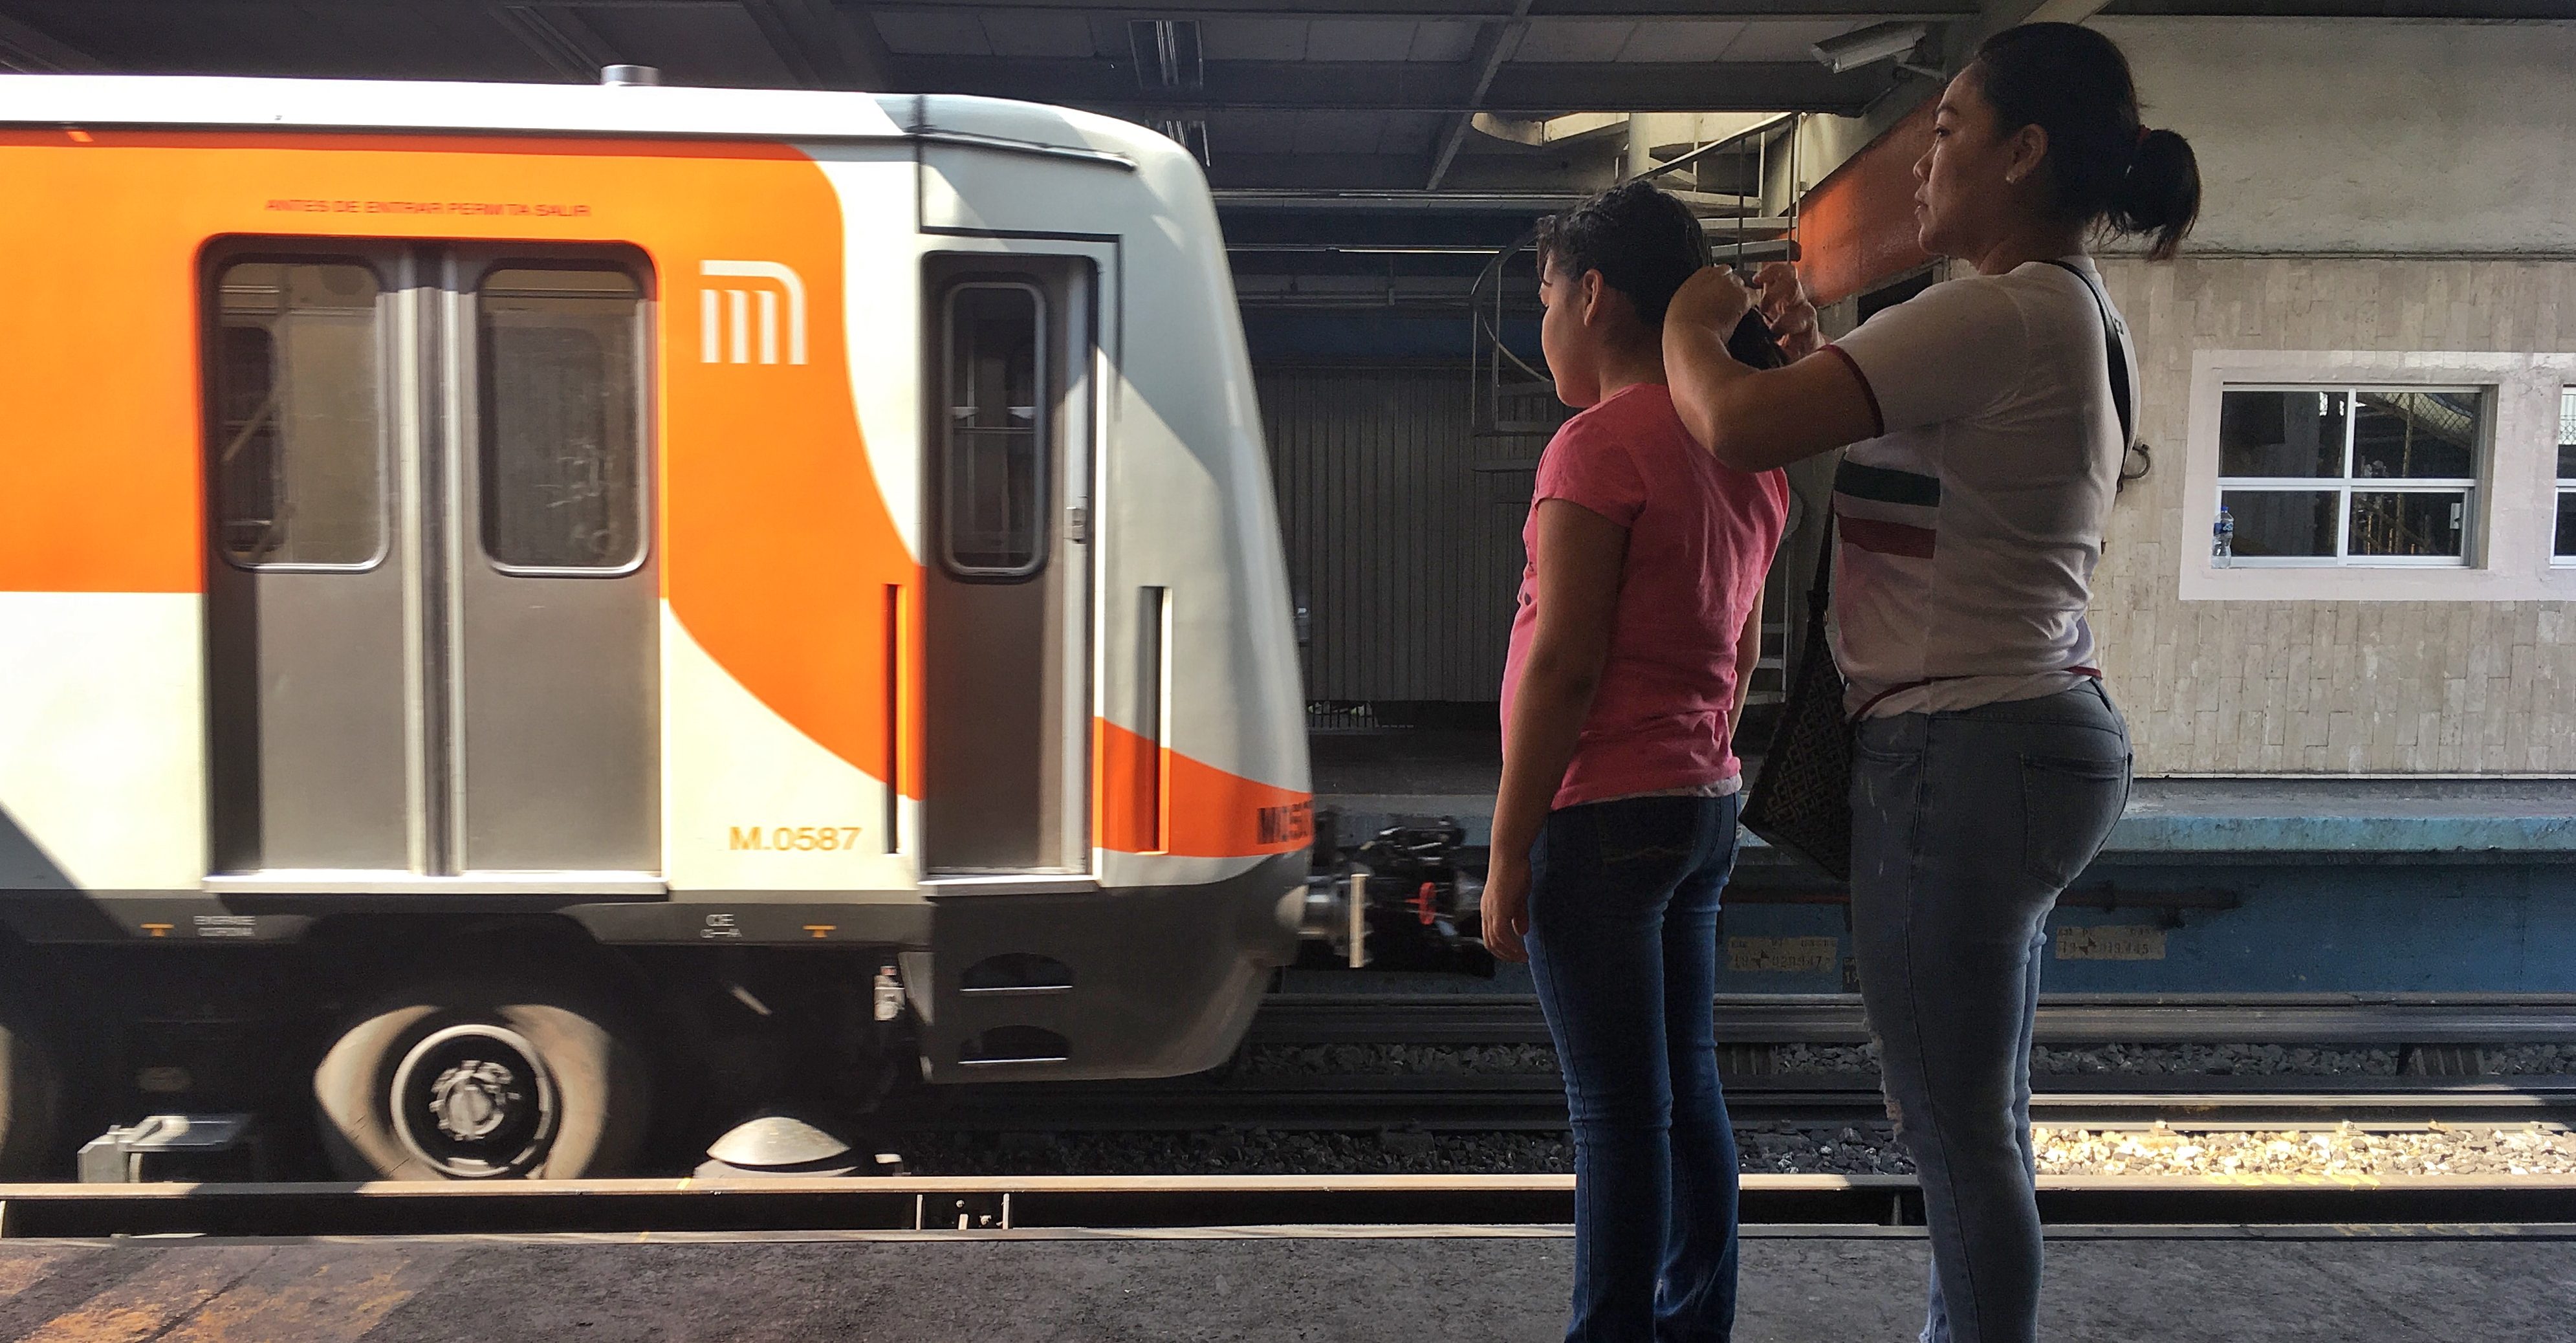 Attempts of kidnapping in the Metro will be investigated: PGJCDMX